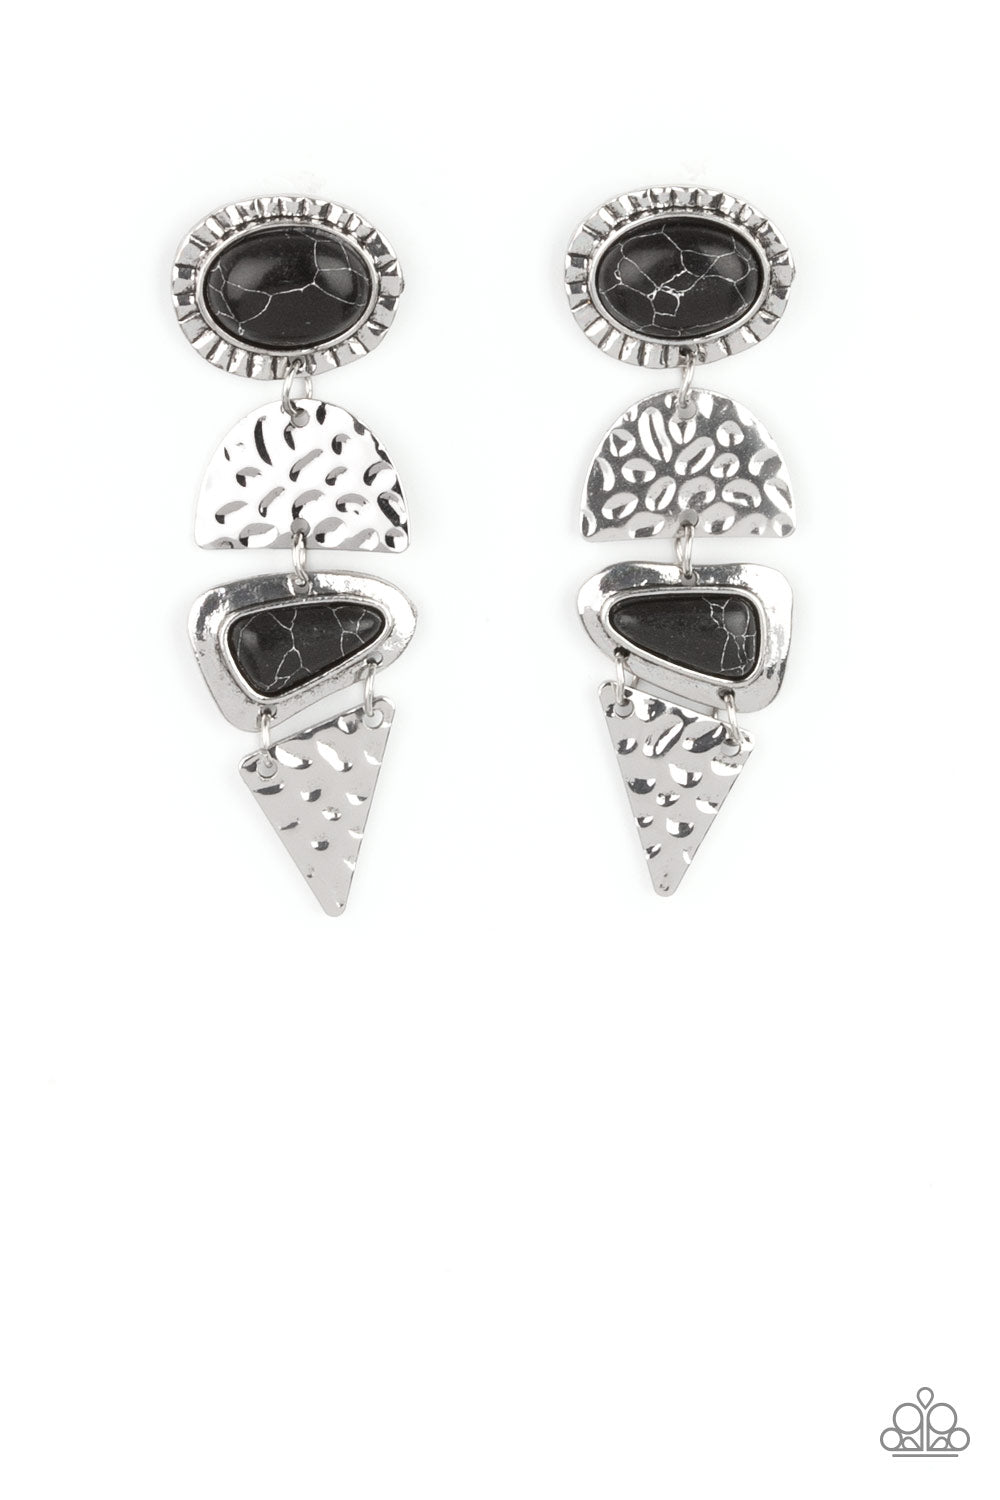 Earthy Extravagance - Black Stone - Silver Post Earrings - Paparazzi Accessories - Oval and triangular black stone accents, mismatched silver frames alternate with hammered geometric silver plates, creating an elegantly earthy lure. Earring attaches to a standard post fitting.  Bejeweled Accessories By Kristie - Trendy fashion jewelry for everyone -